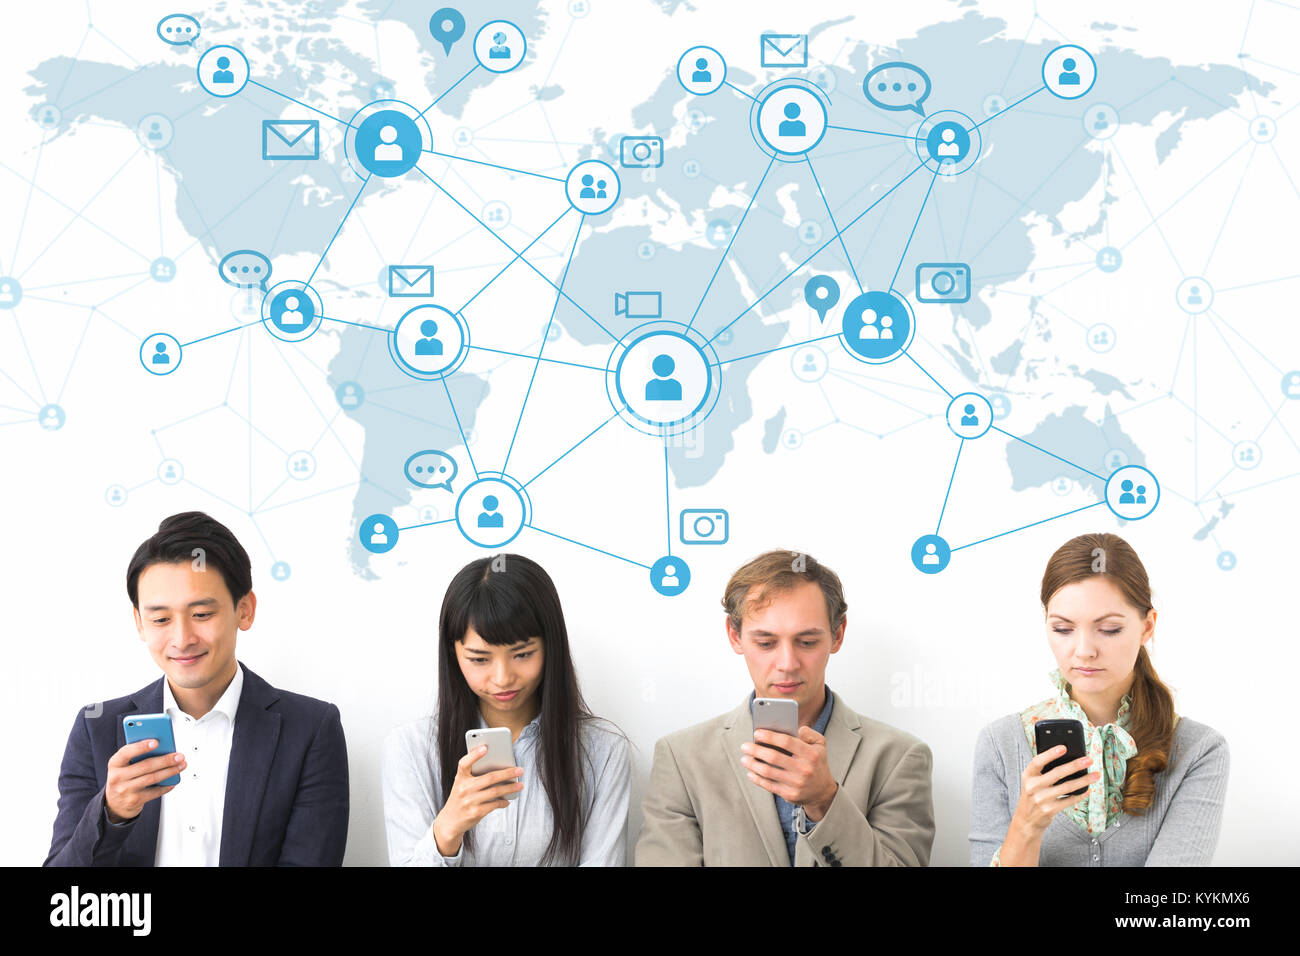 Social network concept. Group of people using smart phone. Stock Photo